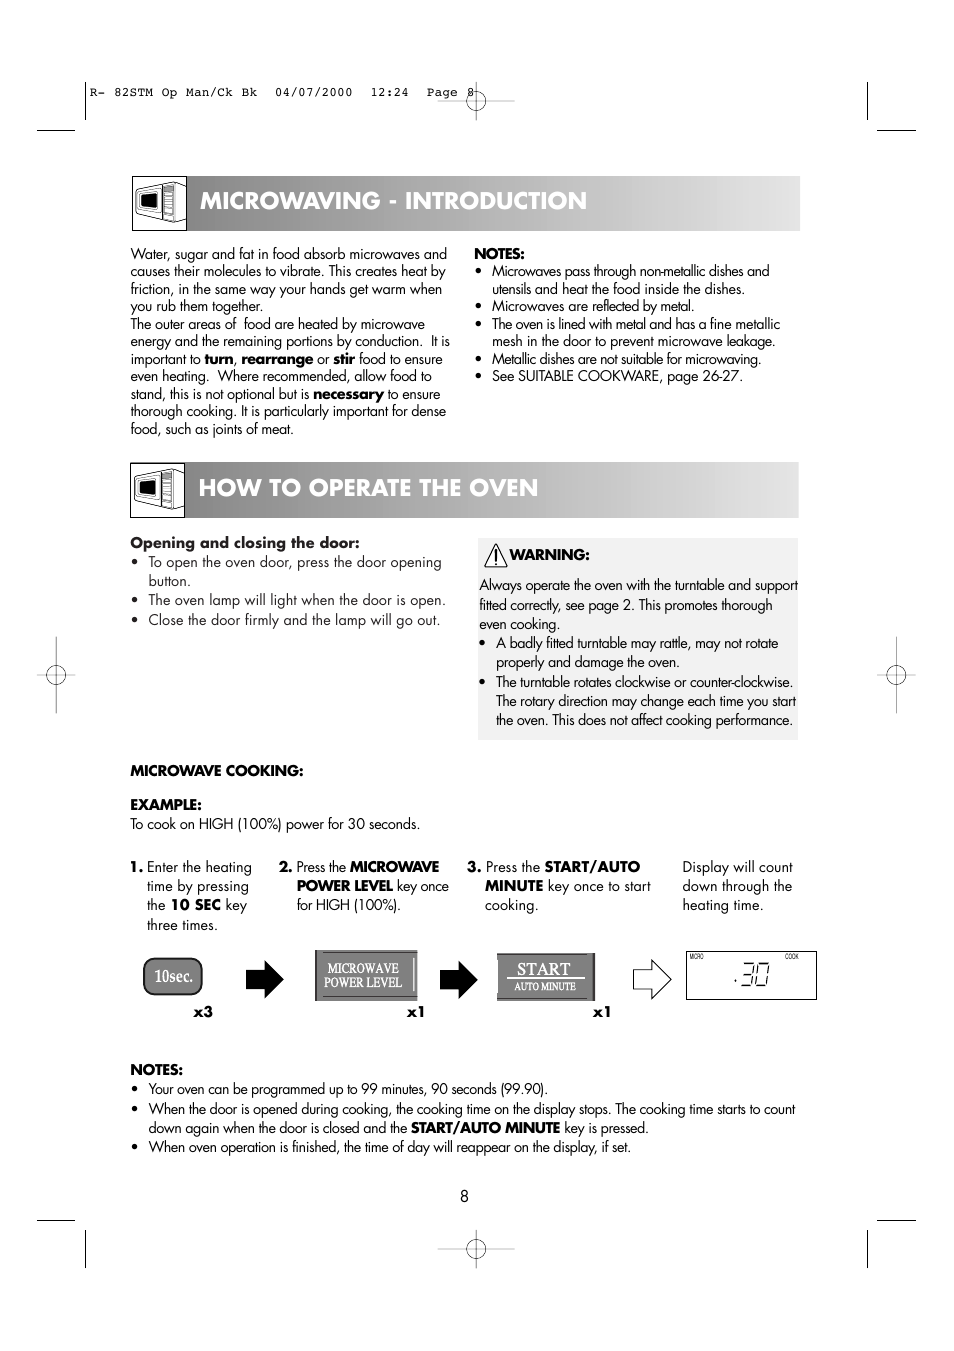 How to operate the oven microwaving - introduction | Sharp R82STMA User Manual | Page 10 / 68